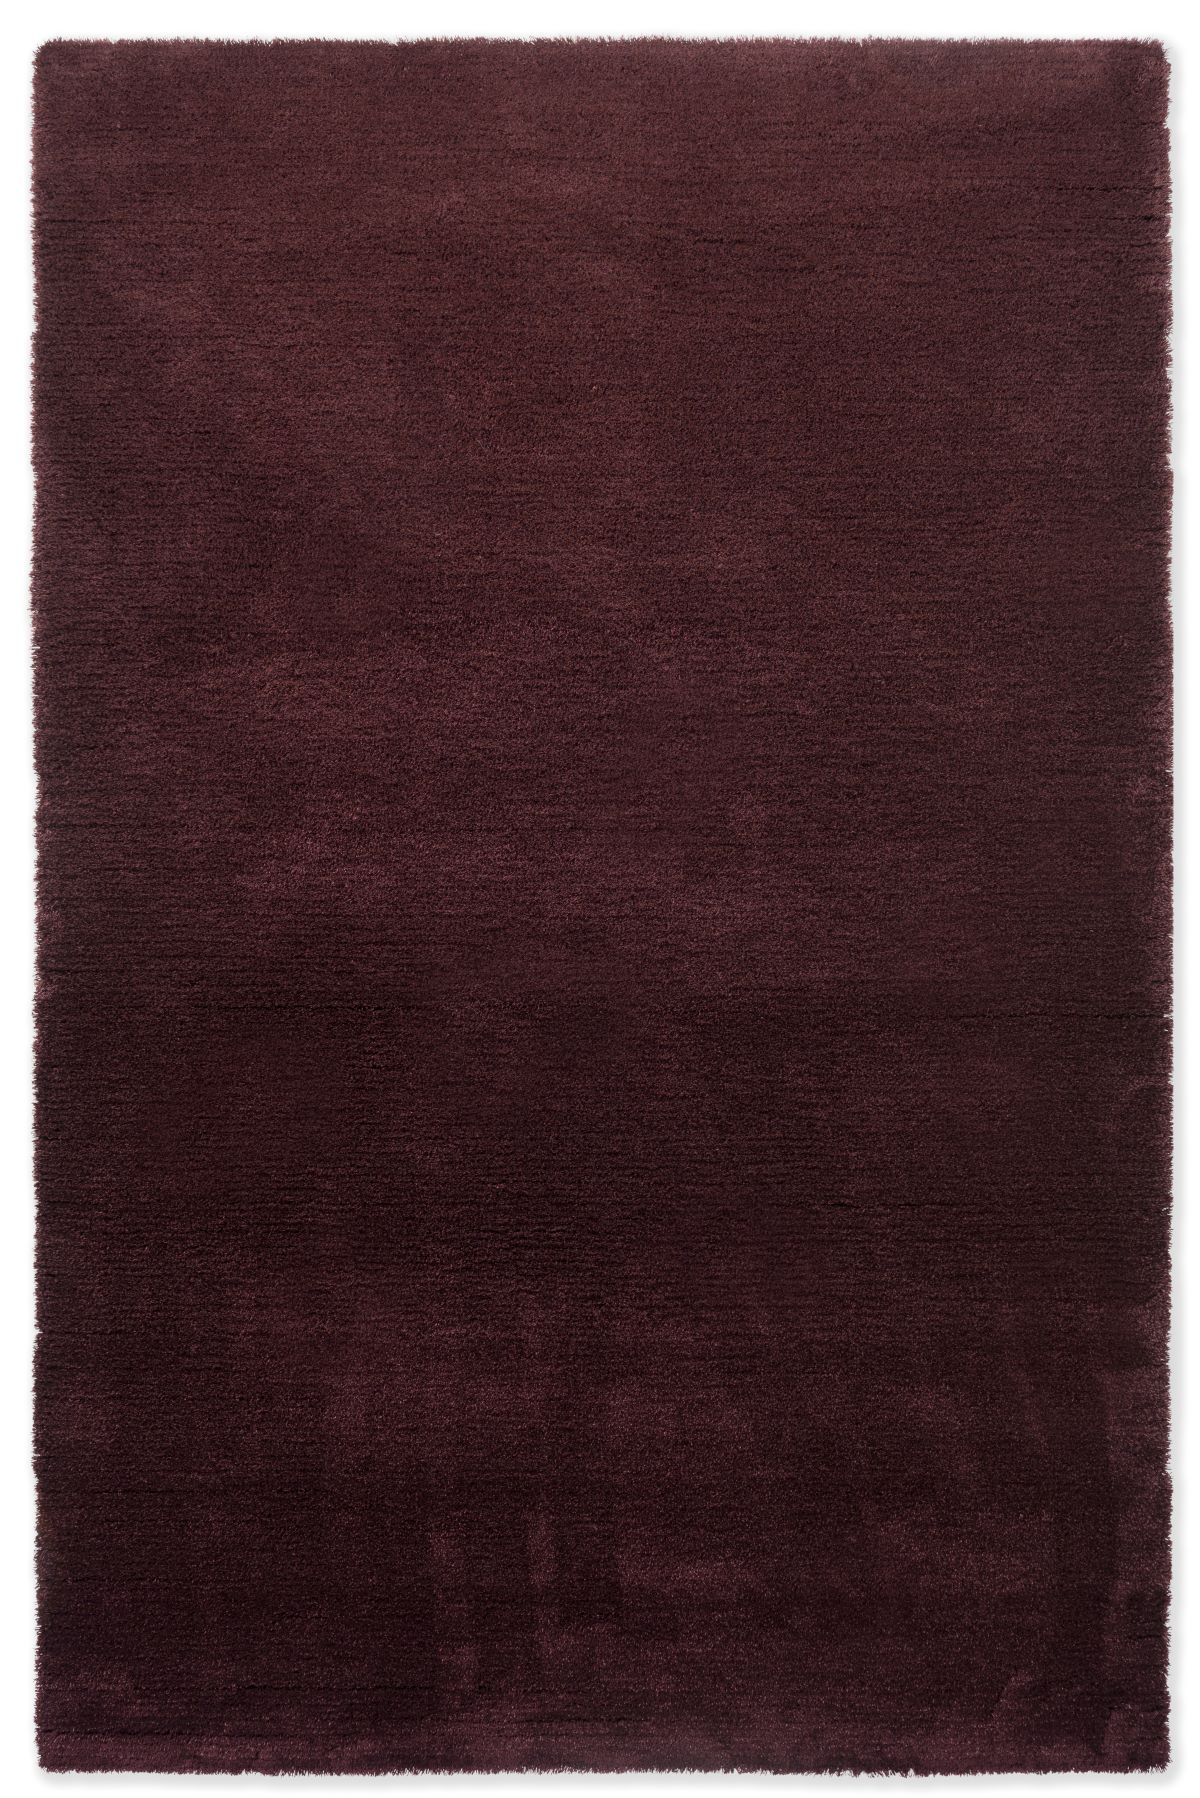 brink-and-campman-rug-shade-low-plum-fig-010100